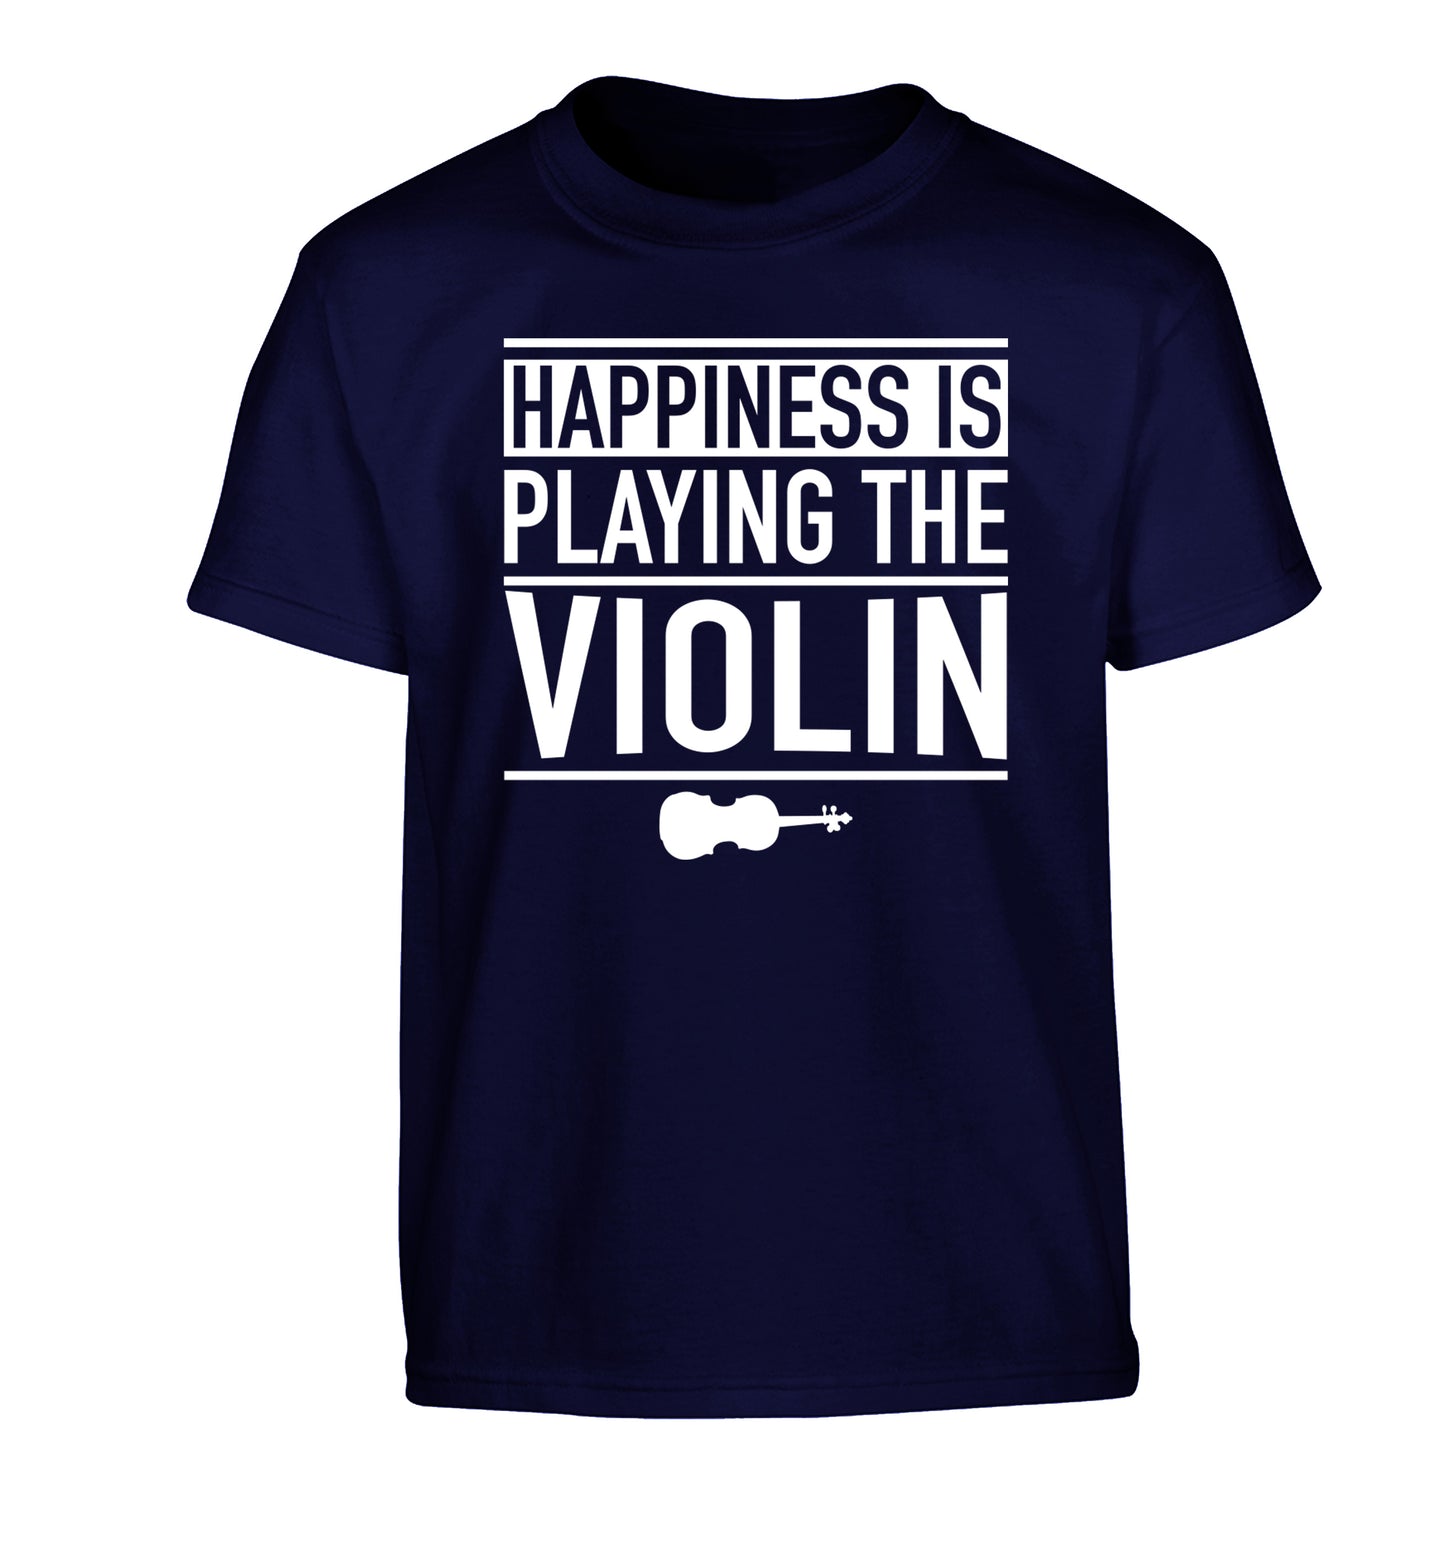 Happiness is playing the violin Children's navy Tshirt 12-13 Years